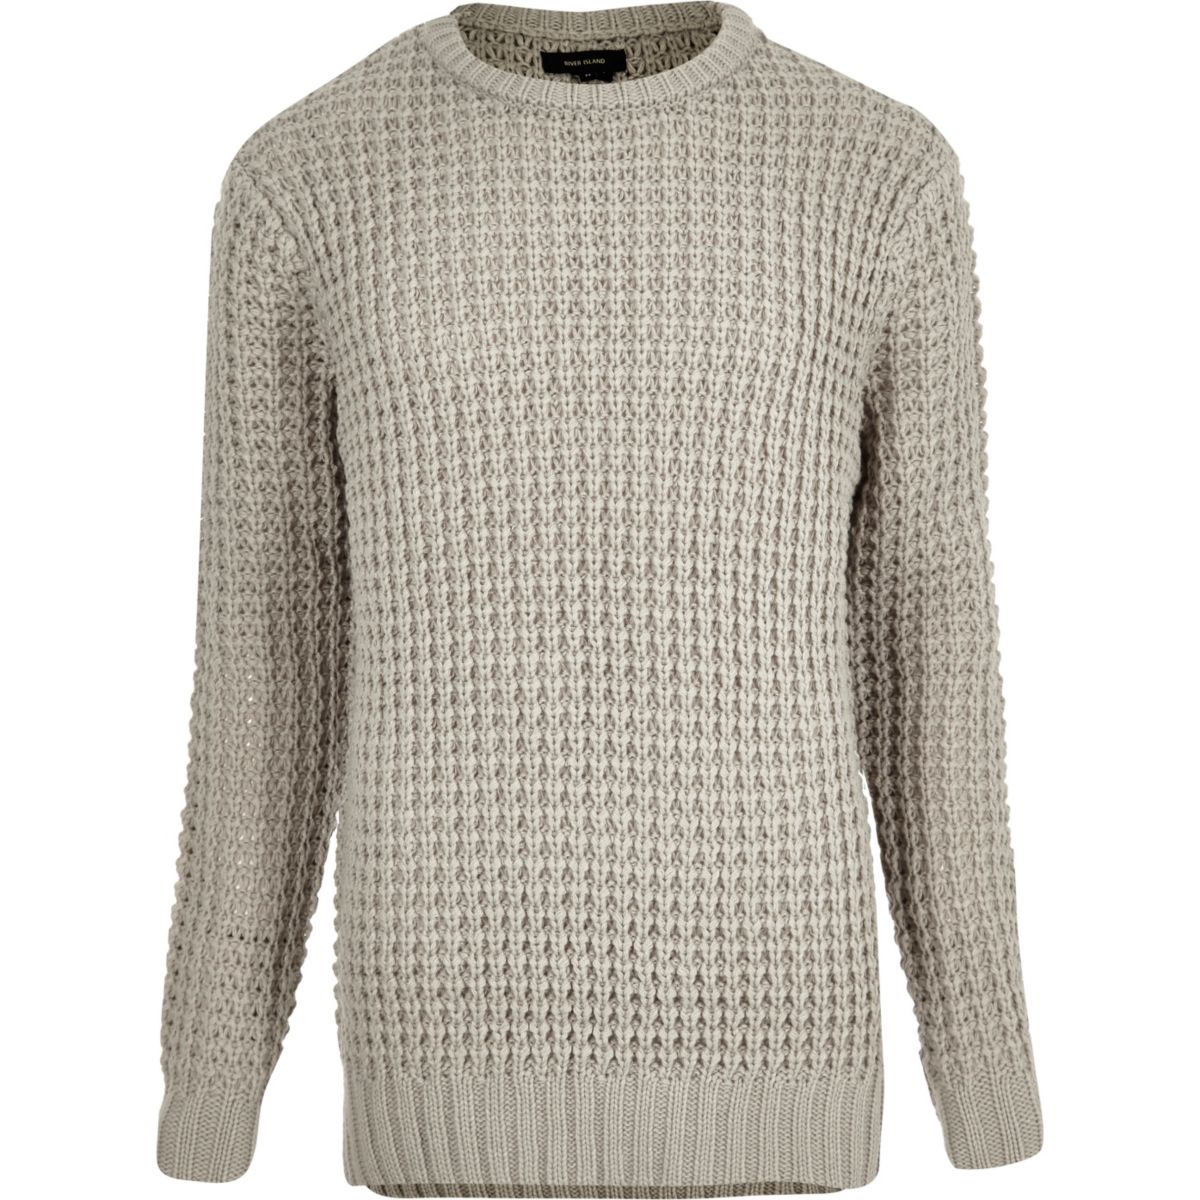 Stone chunky waffle jumper - Jumpers & Cardigans - Sale - men